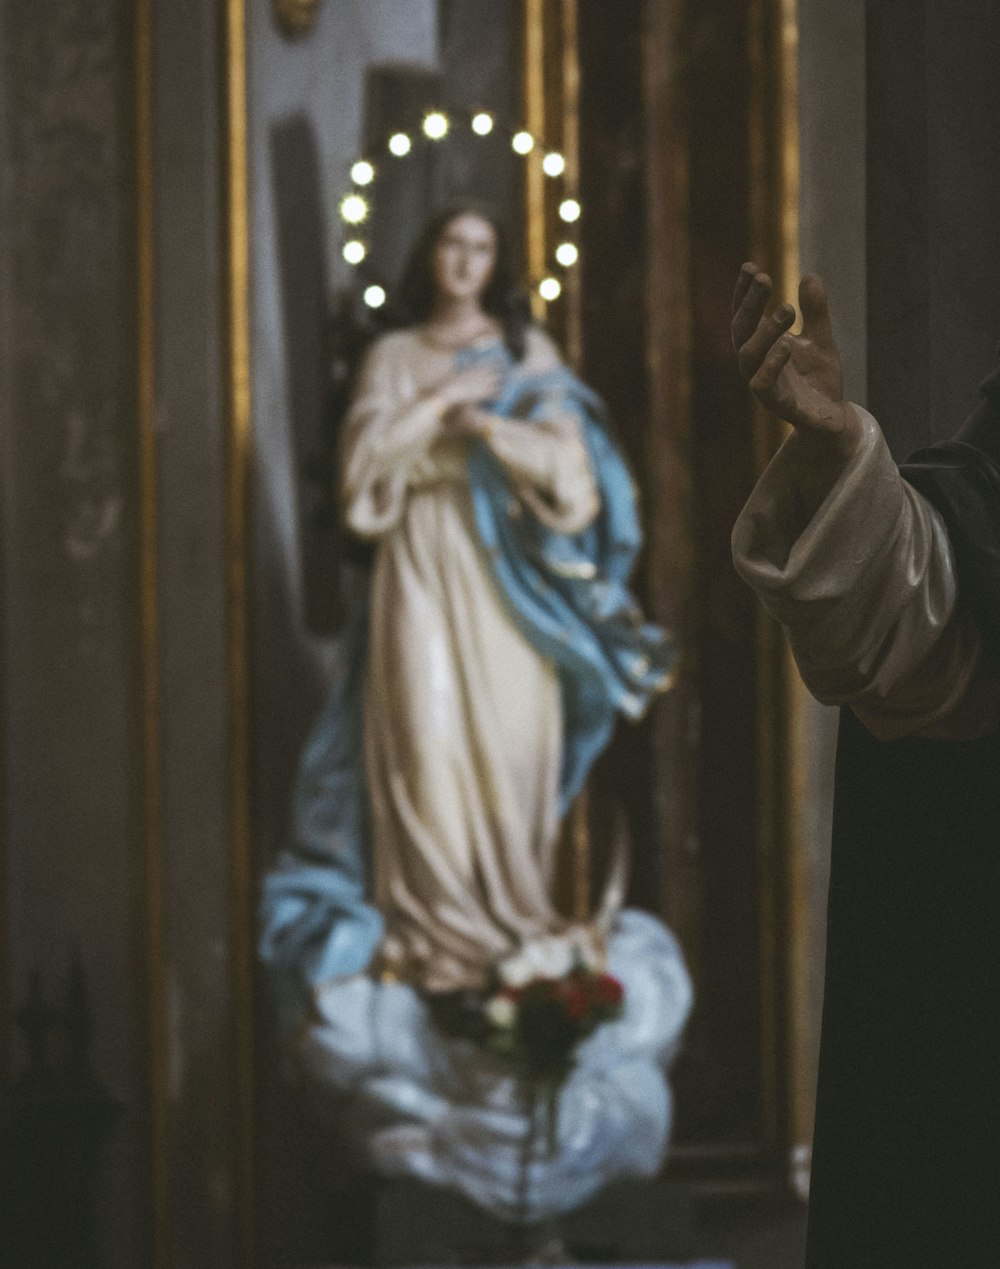 a statue of the virgin mary in front of a mirror